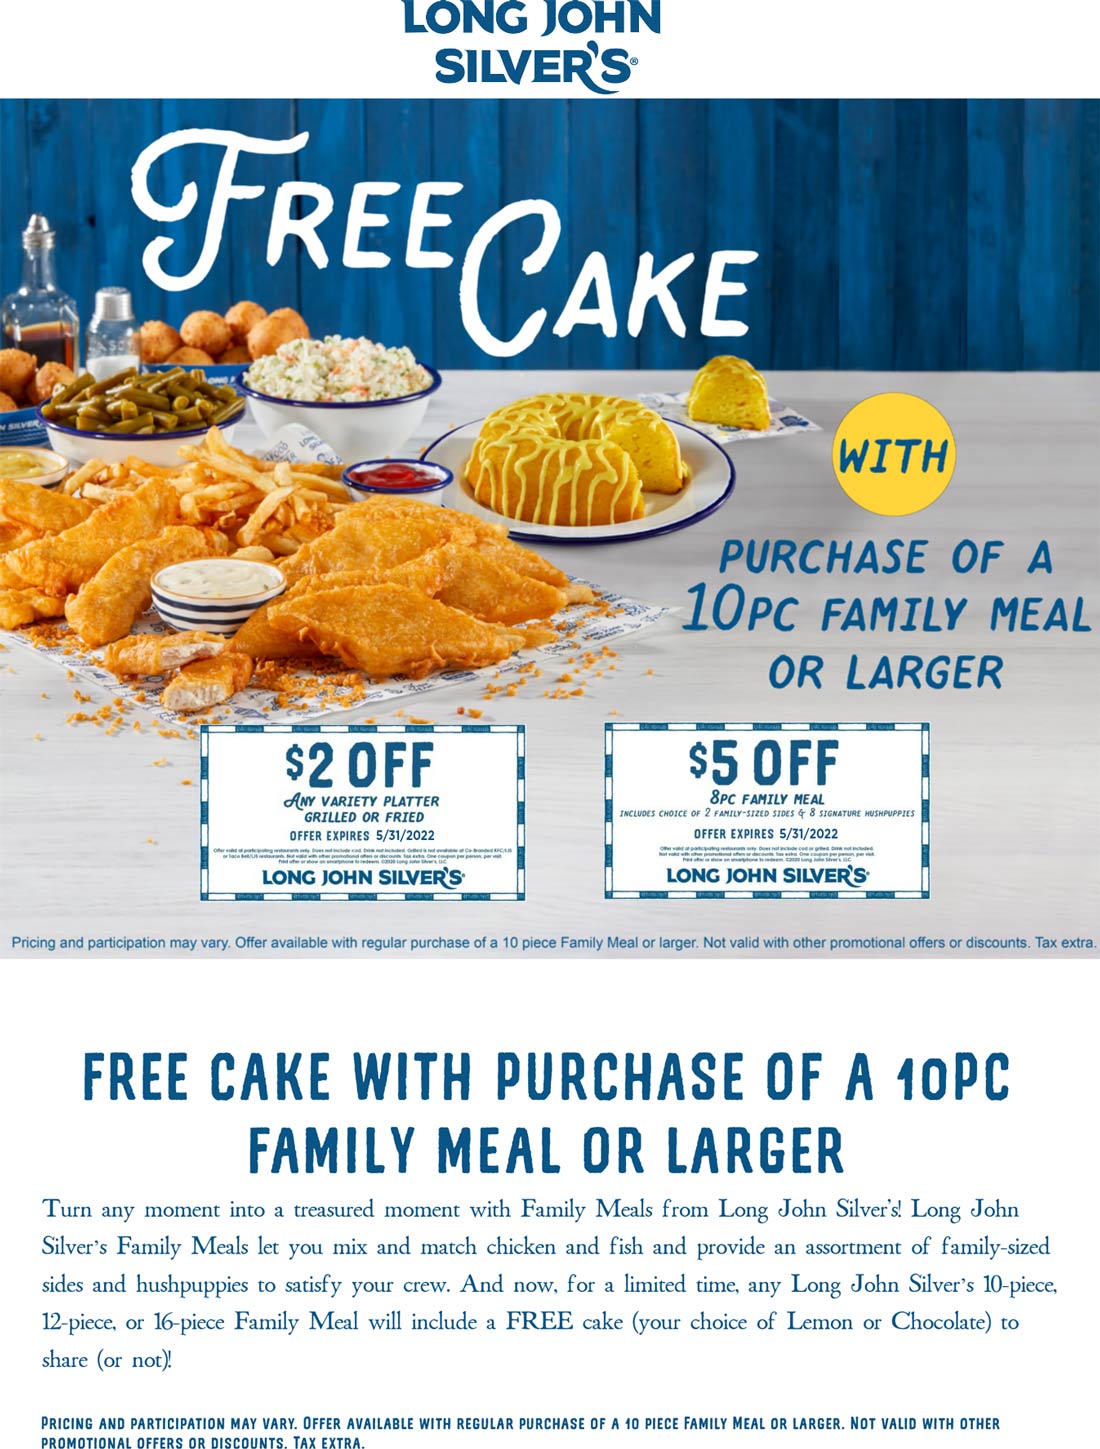 Long John Silvers restaurants Coupon  $2 off platter, $5 off 8pc meal & free whole cake with 10pc+ at Long John Silvers restaurants #longjohnsilvers 